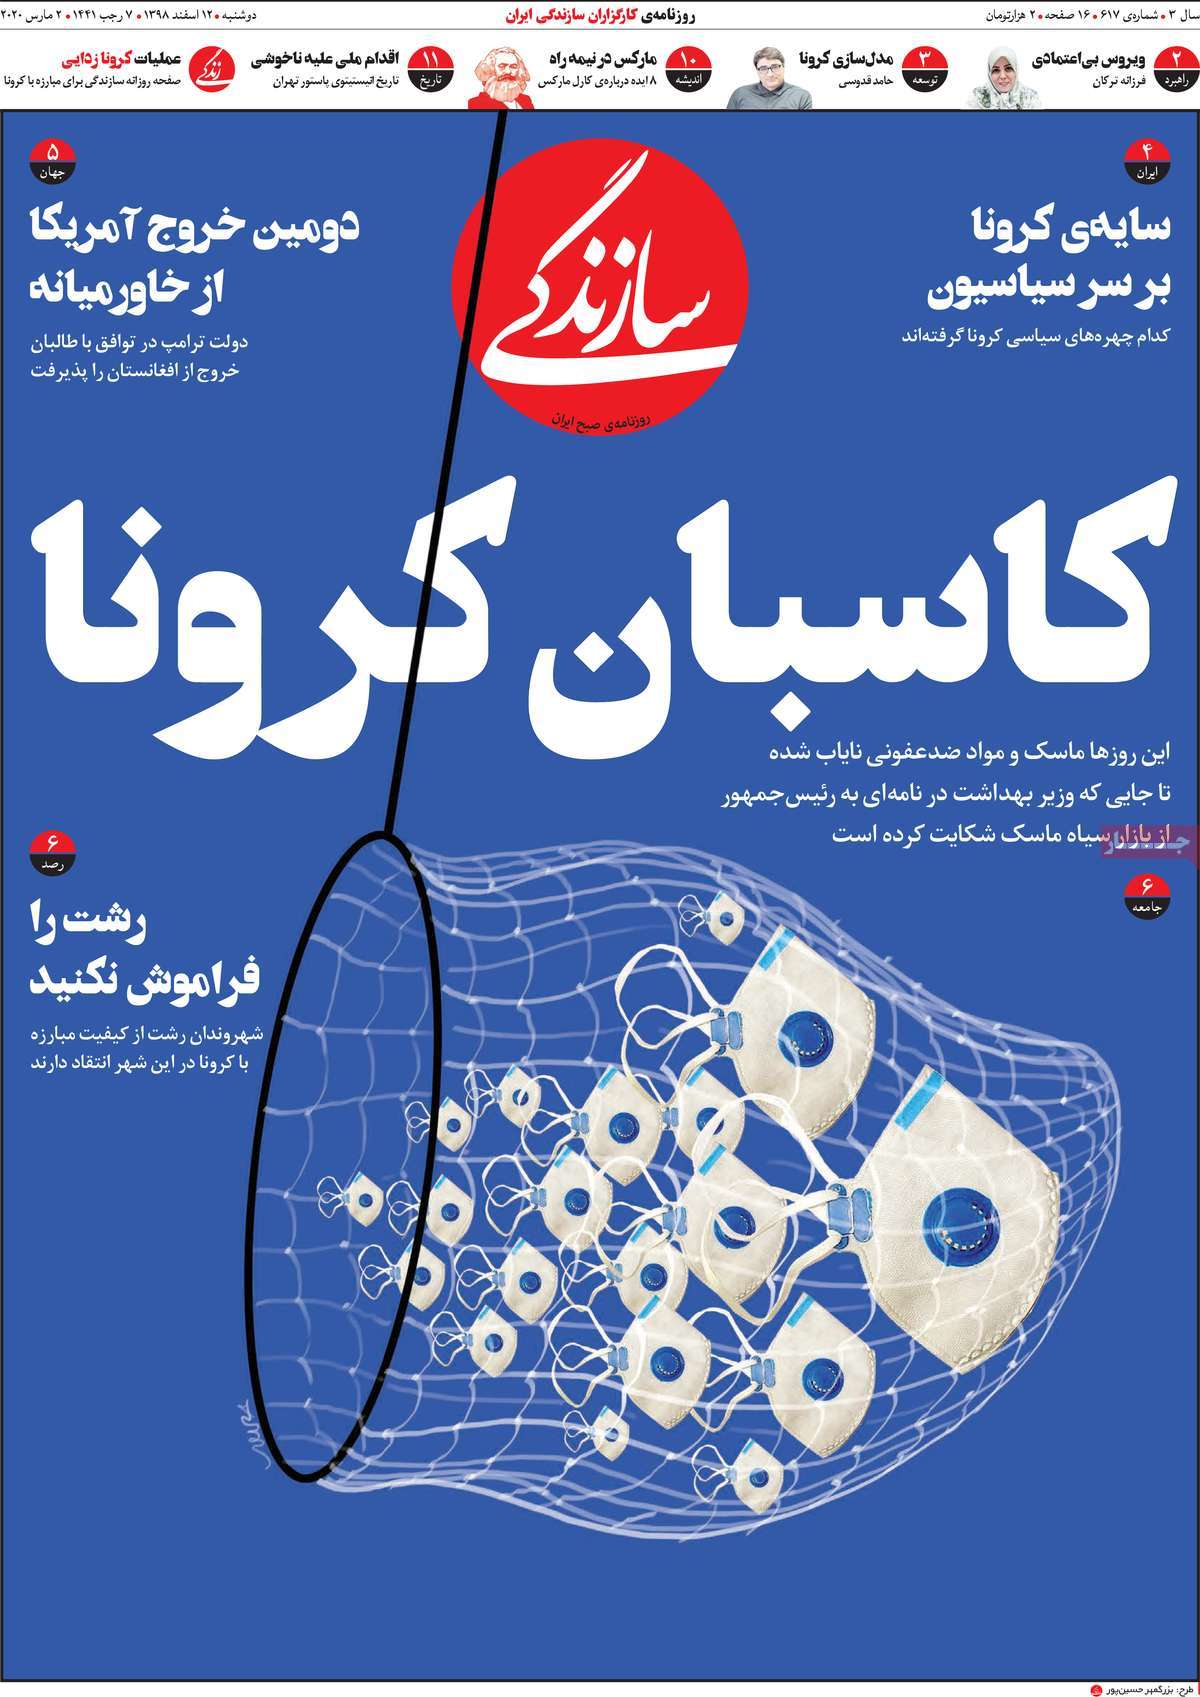 A Look at Iranian Newspaper Front Pages on March 2